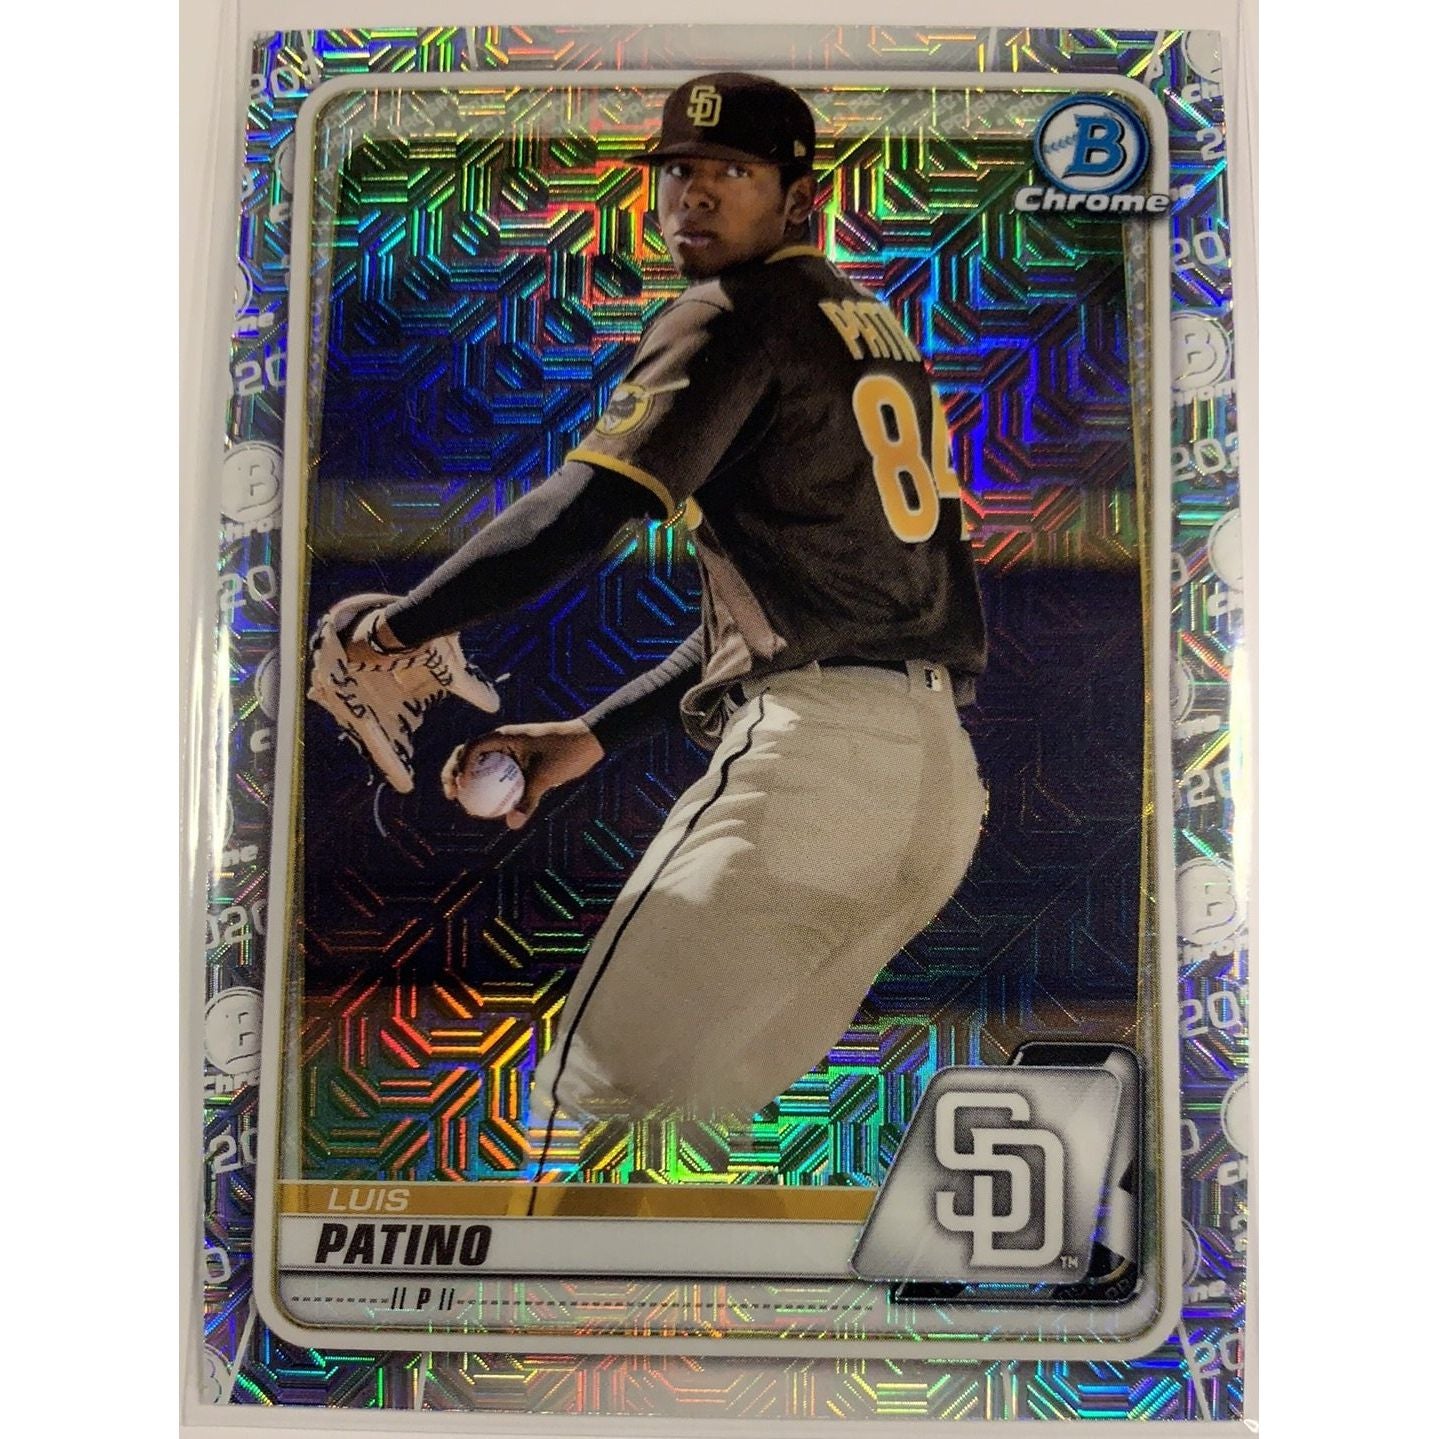  2020 Bowman Chrome Luis Patino Mojo Refractor  Local Legends Cards & Collectibles